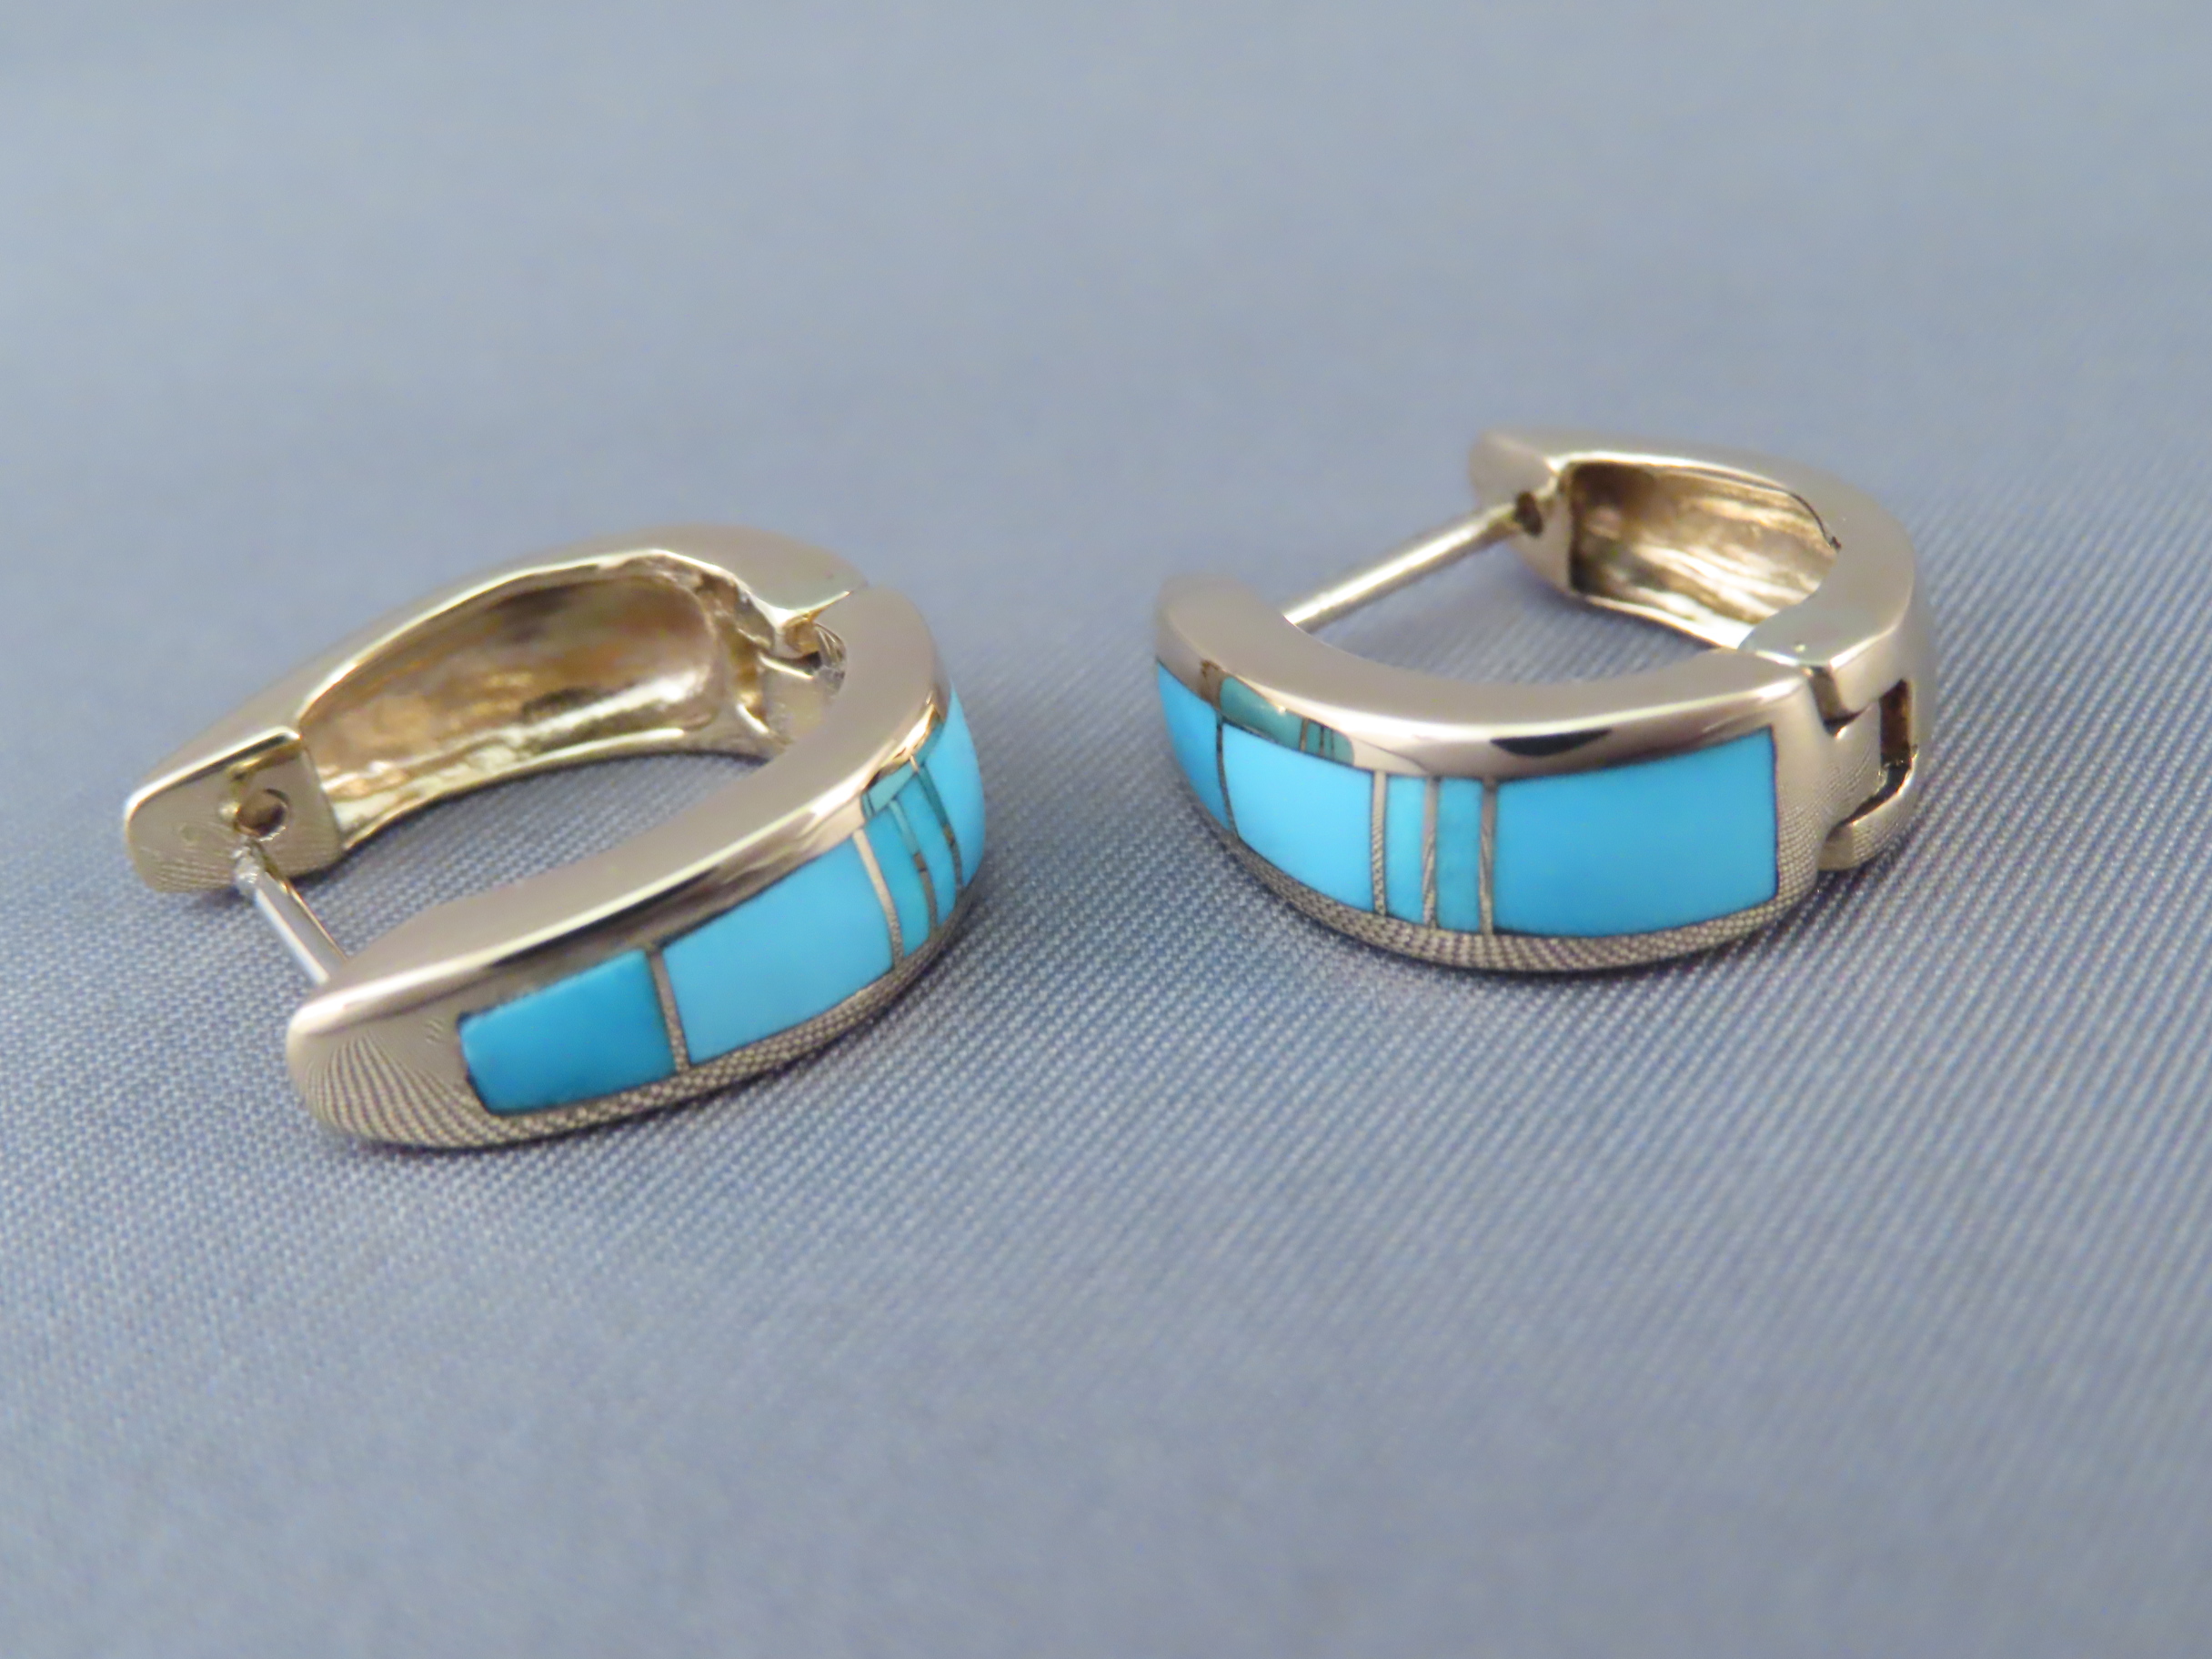 14kt Gold Earrings with Turquoise Inlay - Turquoise Inlay Gold Earrings